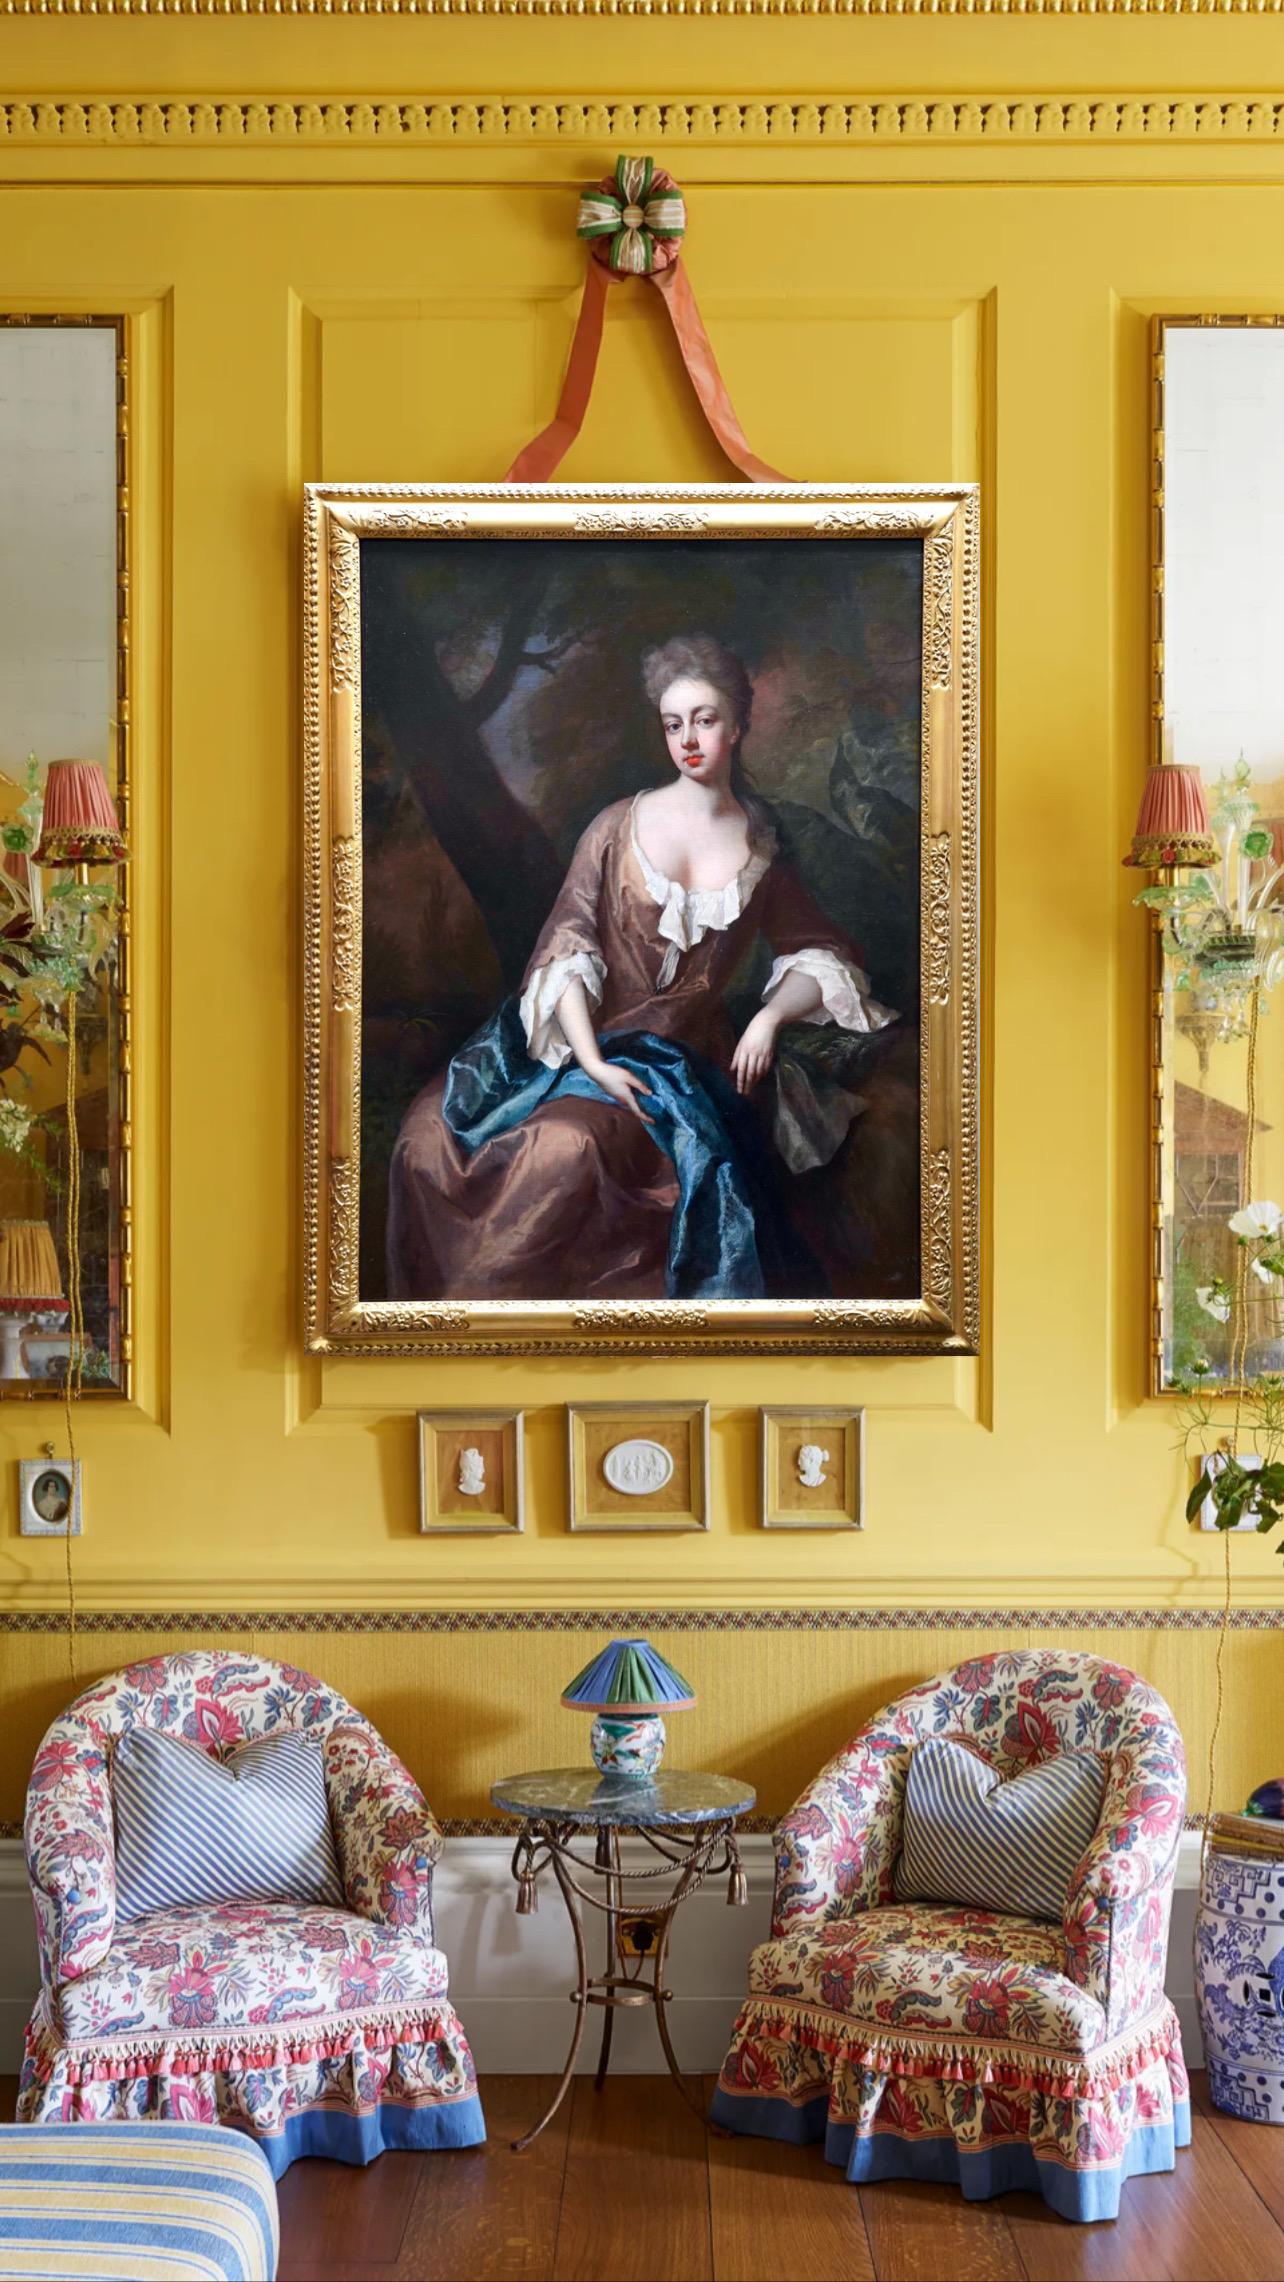 Provenance
The Sitter (Probably commissioned for the marriage of Samuel Edwin and Lady Catherine Montagu in 1697), 
Thence by descent, Charles Edwin (c. 1670 - 1716), Llanmihangel Plas, Glamorgan; Thence by descent to his sister,
Anne Edwin (1701 -